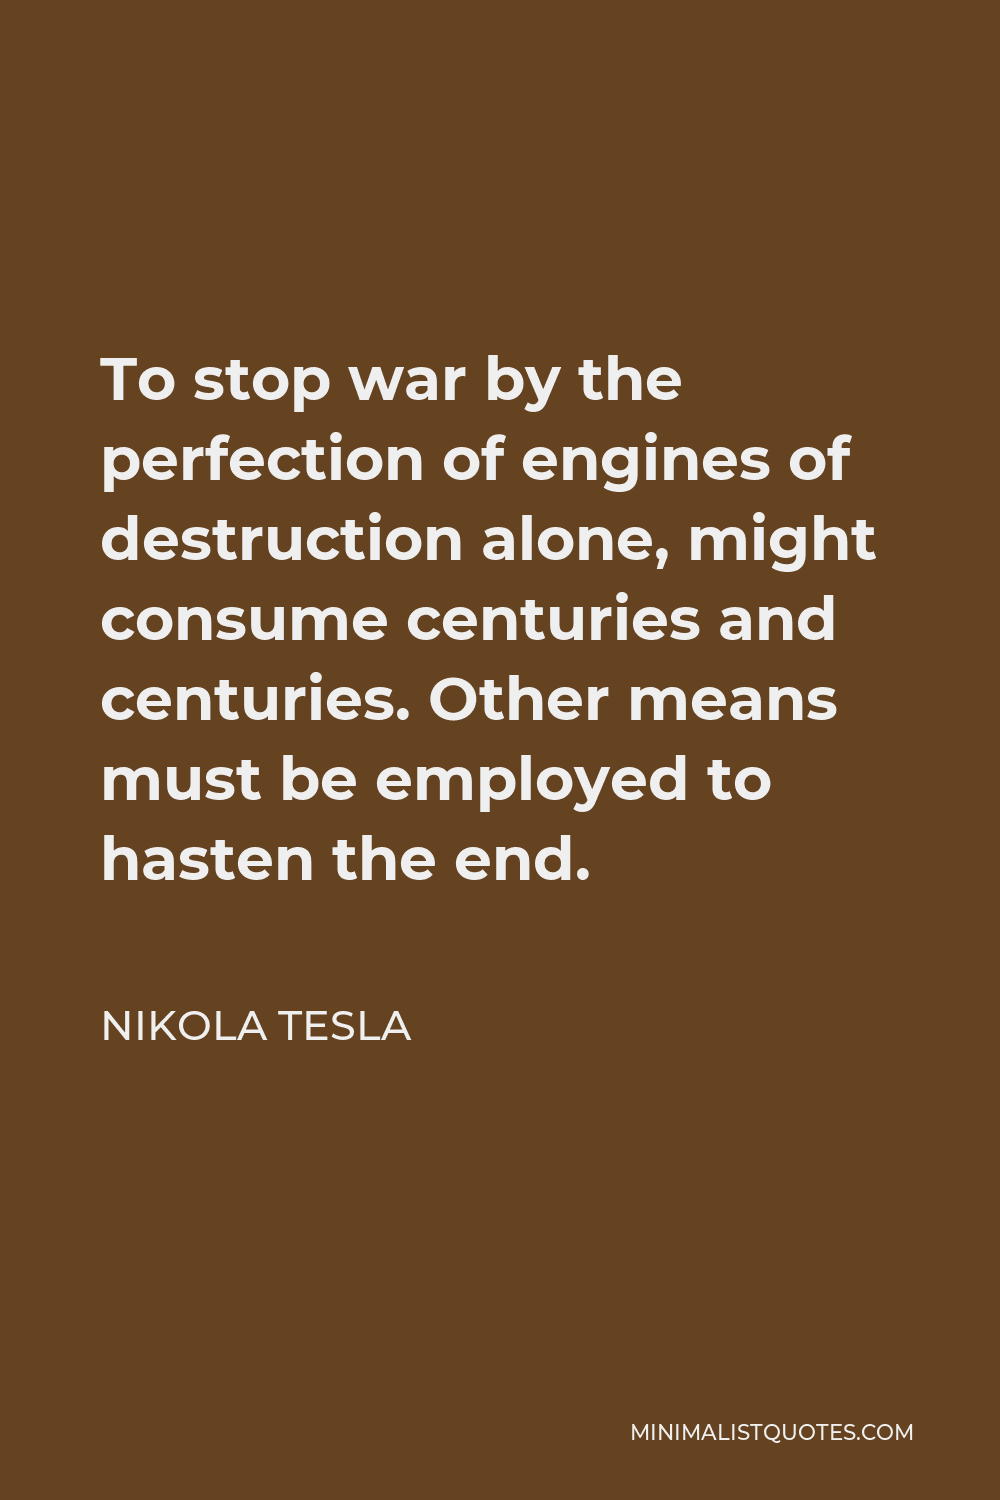 Nikola Tesla Quote - To stop war by the perfection of engines of destruction alone, might consume centuries and centuries. Other means must be employed to hasten the end.